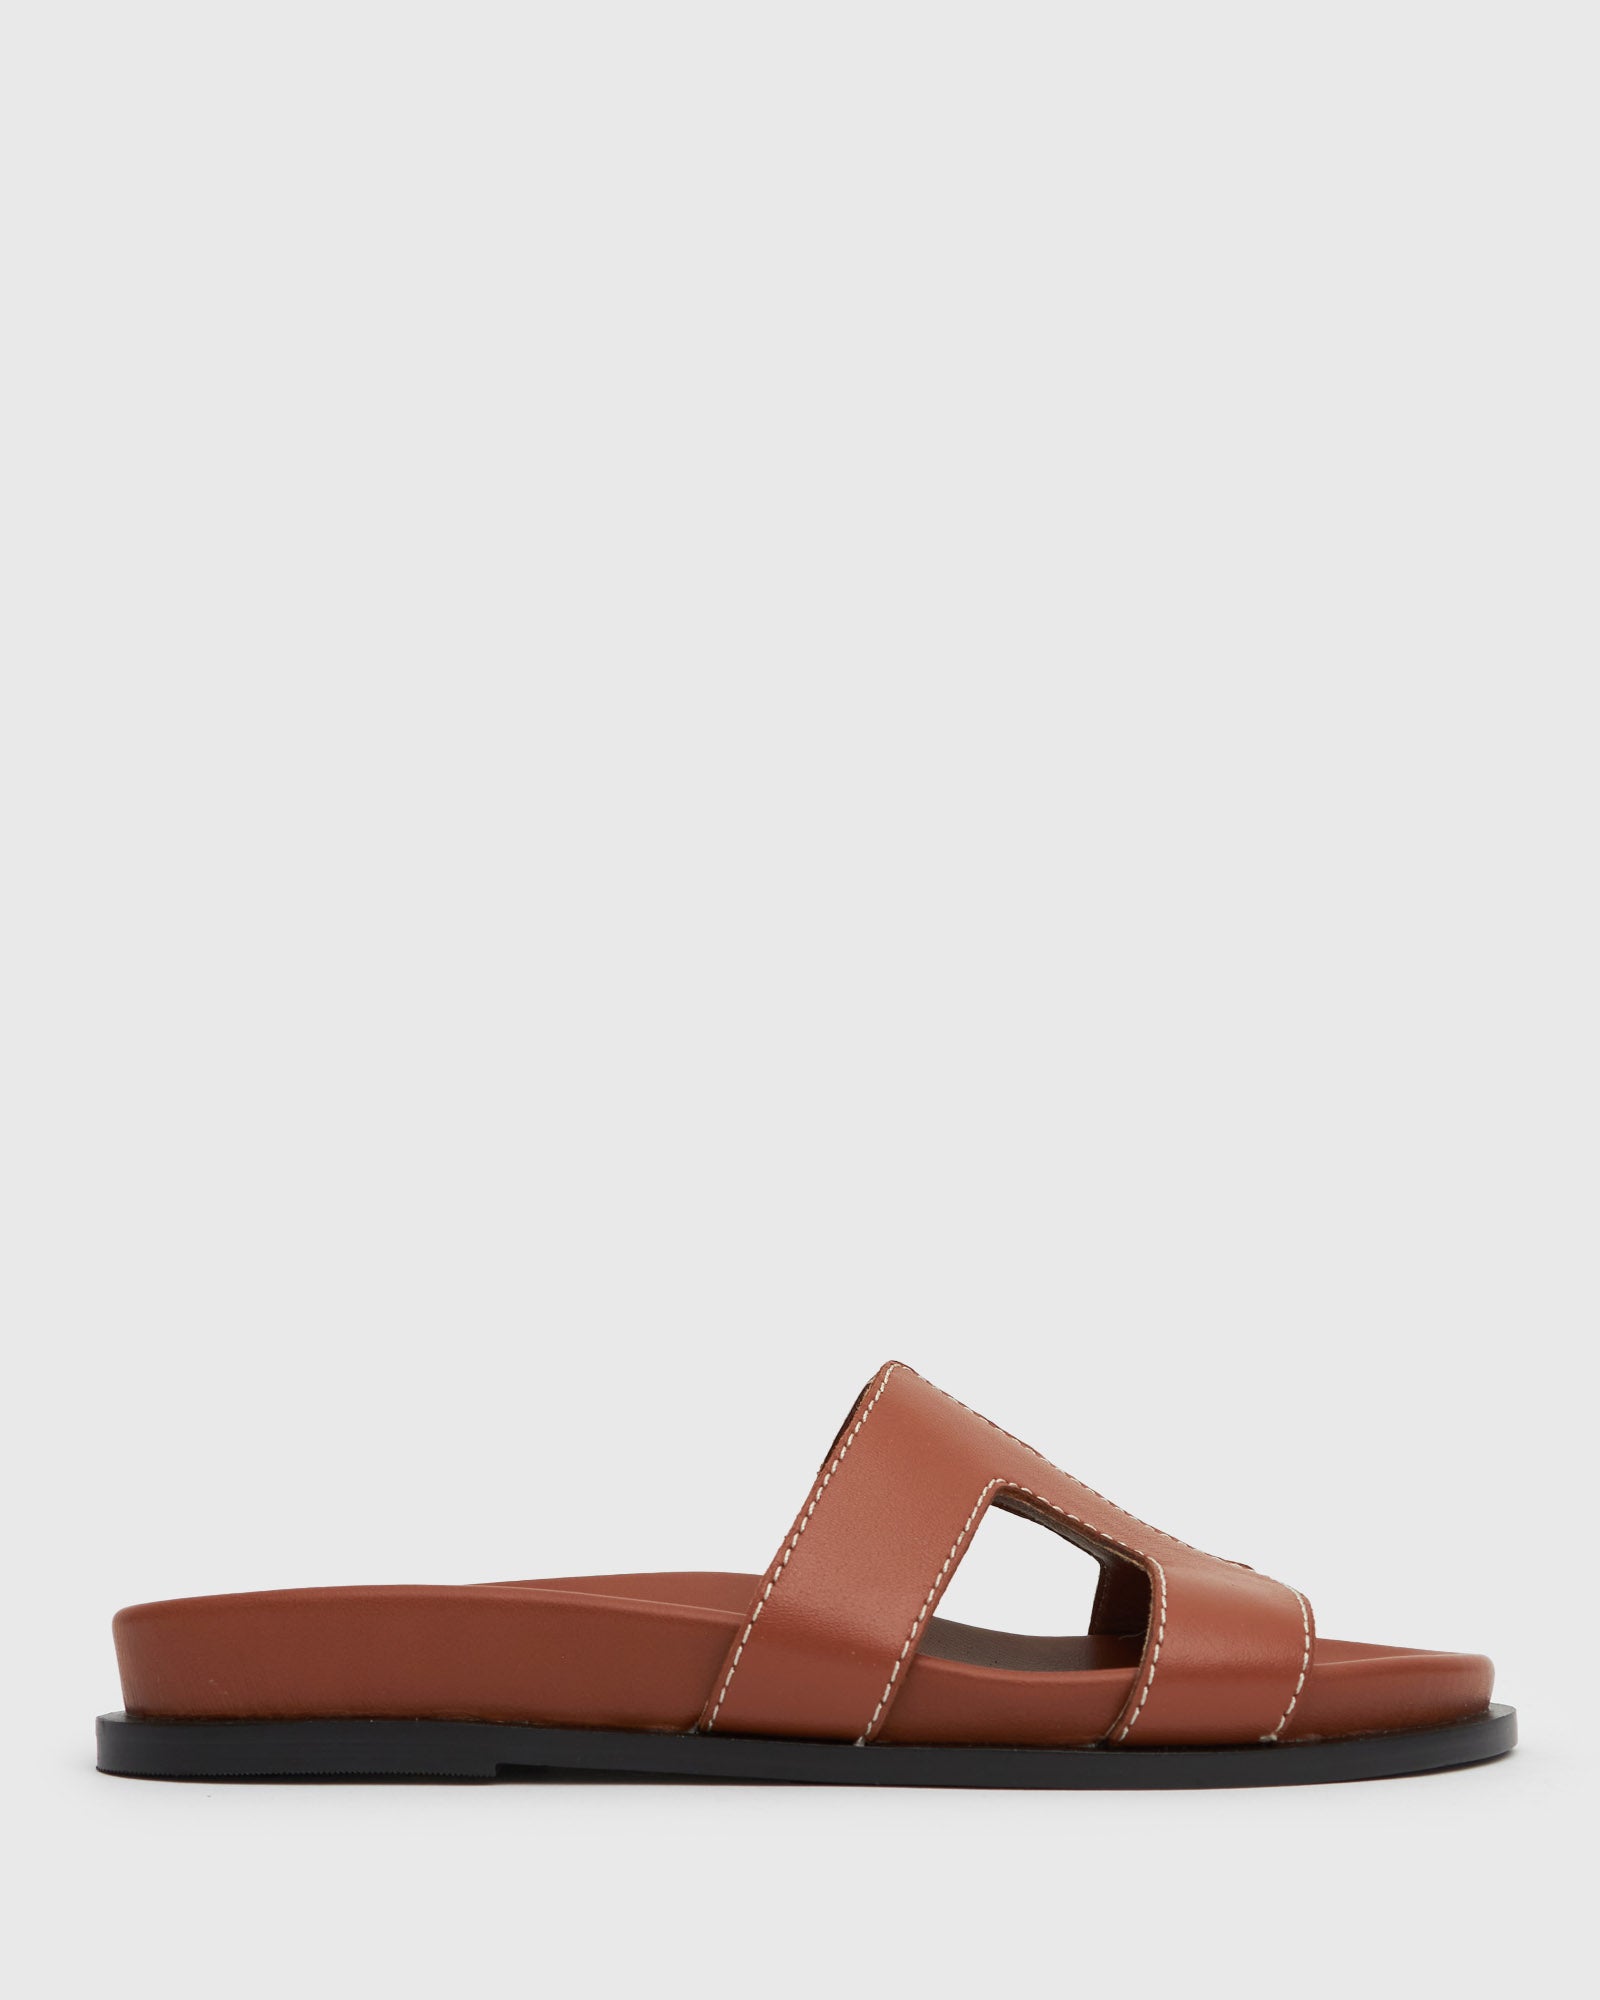 Buy YON Leather Footbed Slides by Airflex online - Betts